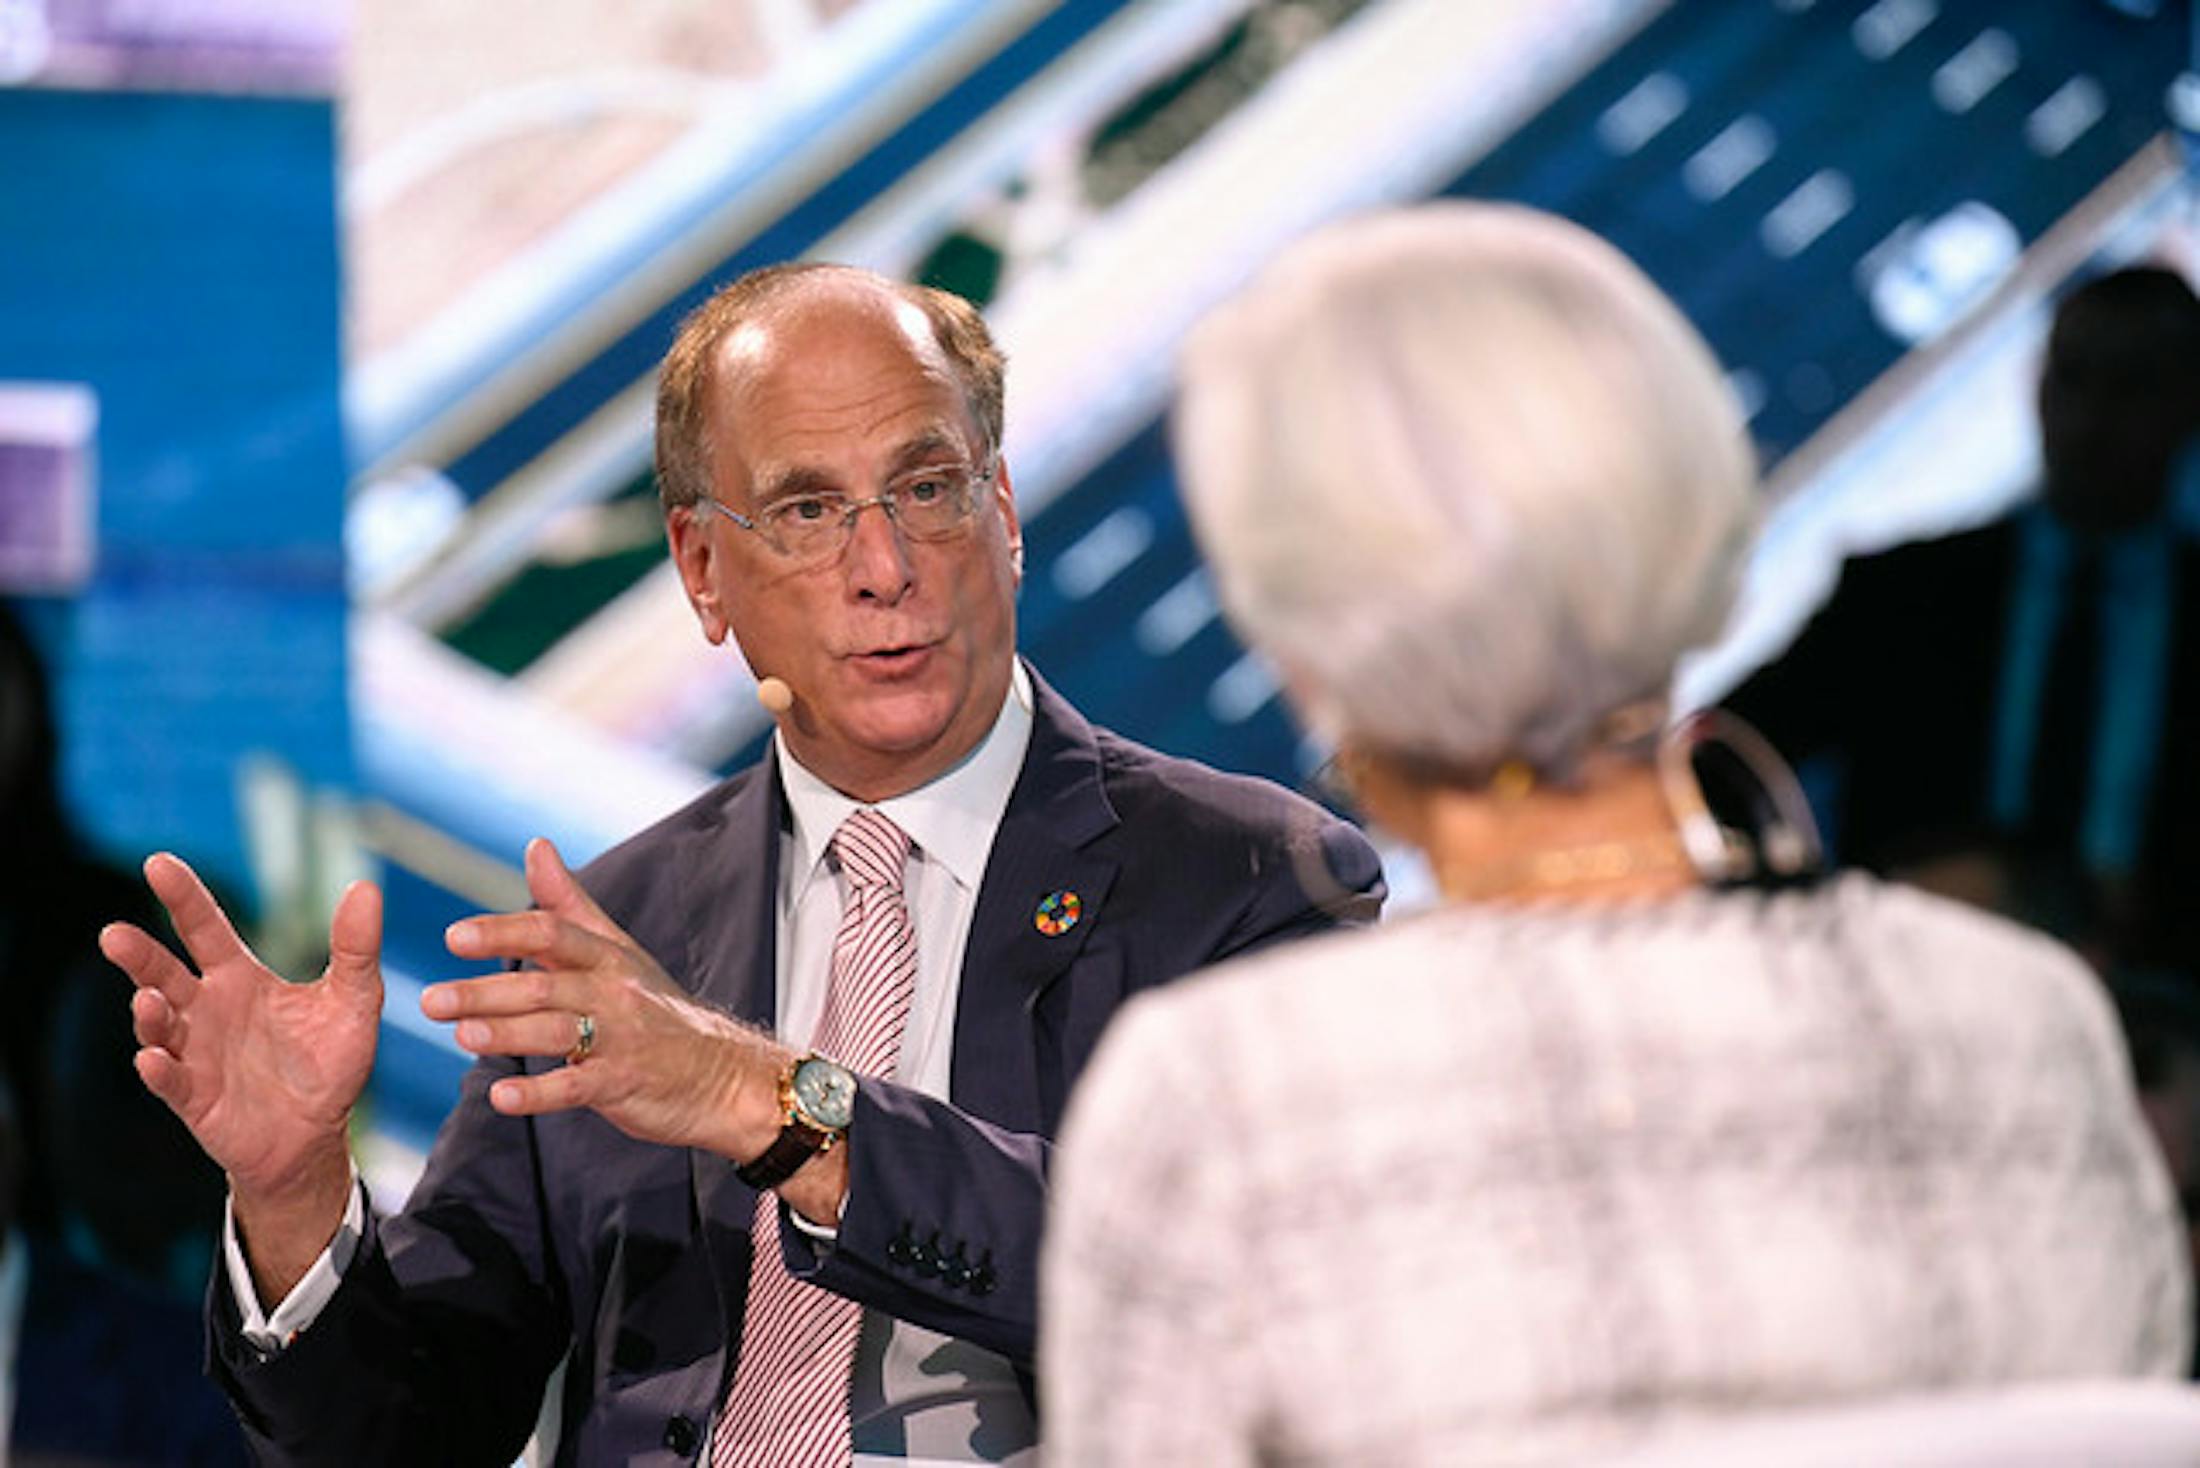 What Larry Fink should say on climate change in his next letter to CEOs